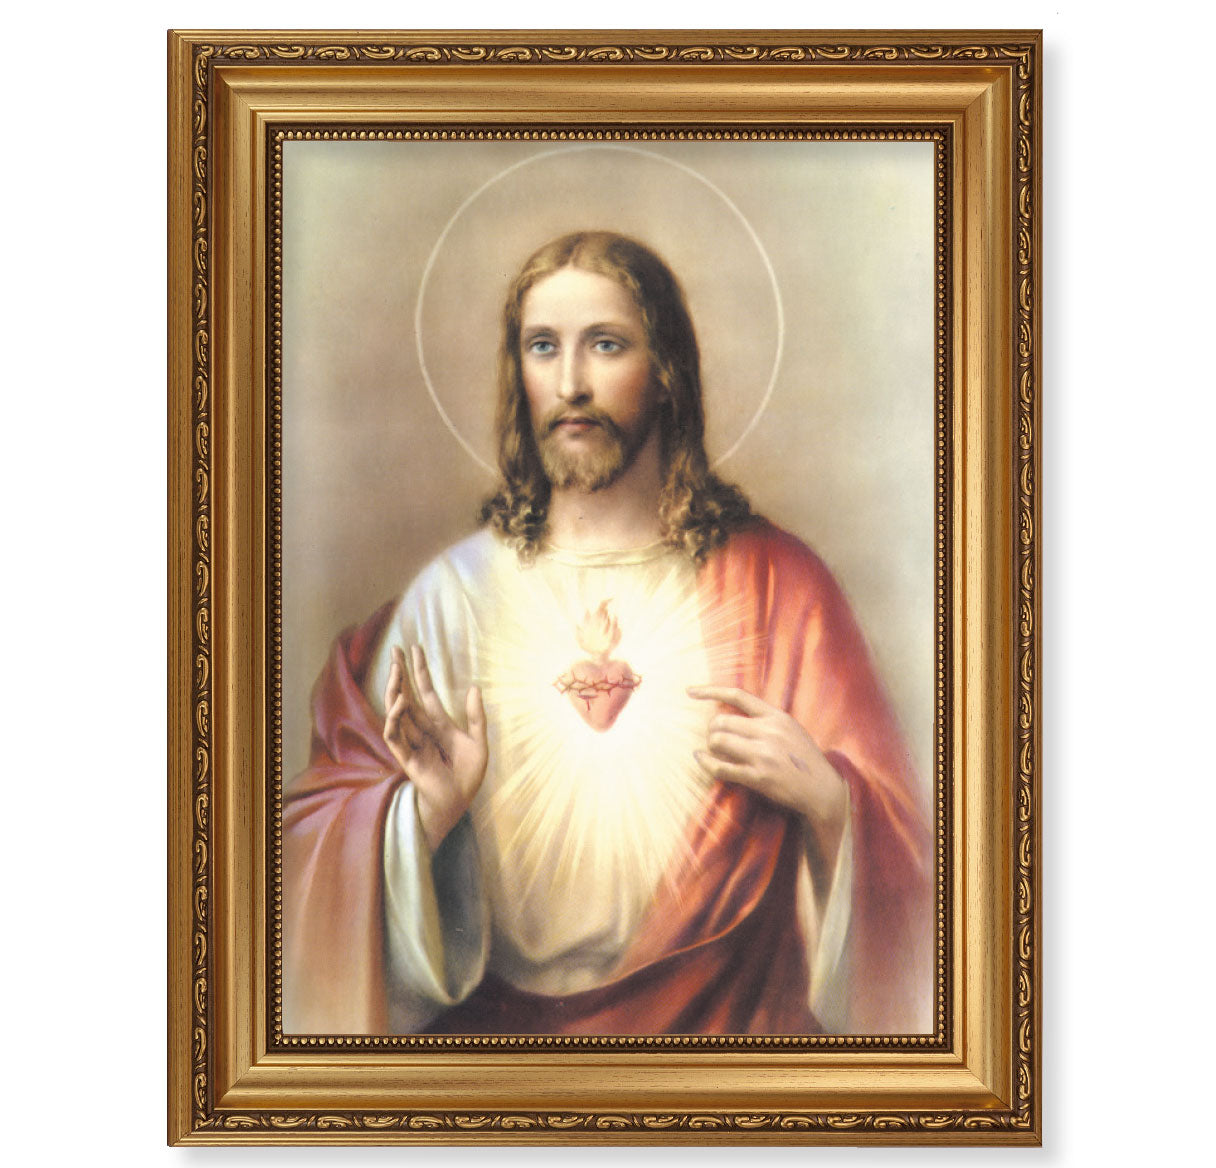 Sacred Heart of Jesus Antique Picture Framed Wall Art Decor, Extra Large, Antique Gold-Leaf Frame with Acanthus-Leaf Trim and Beaded Lip